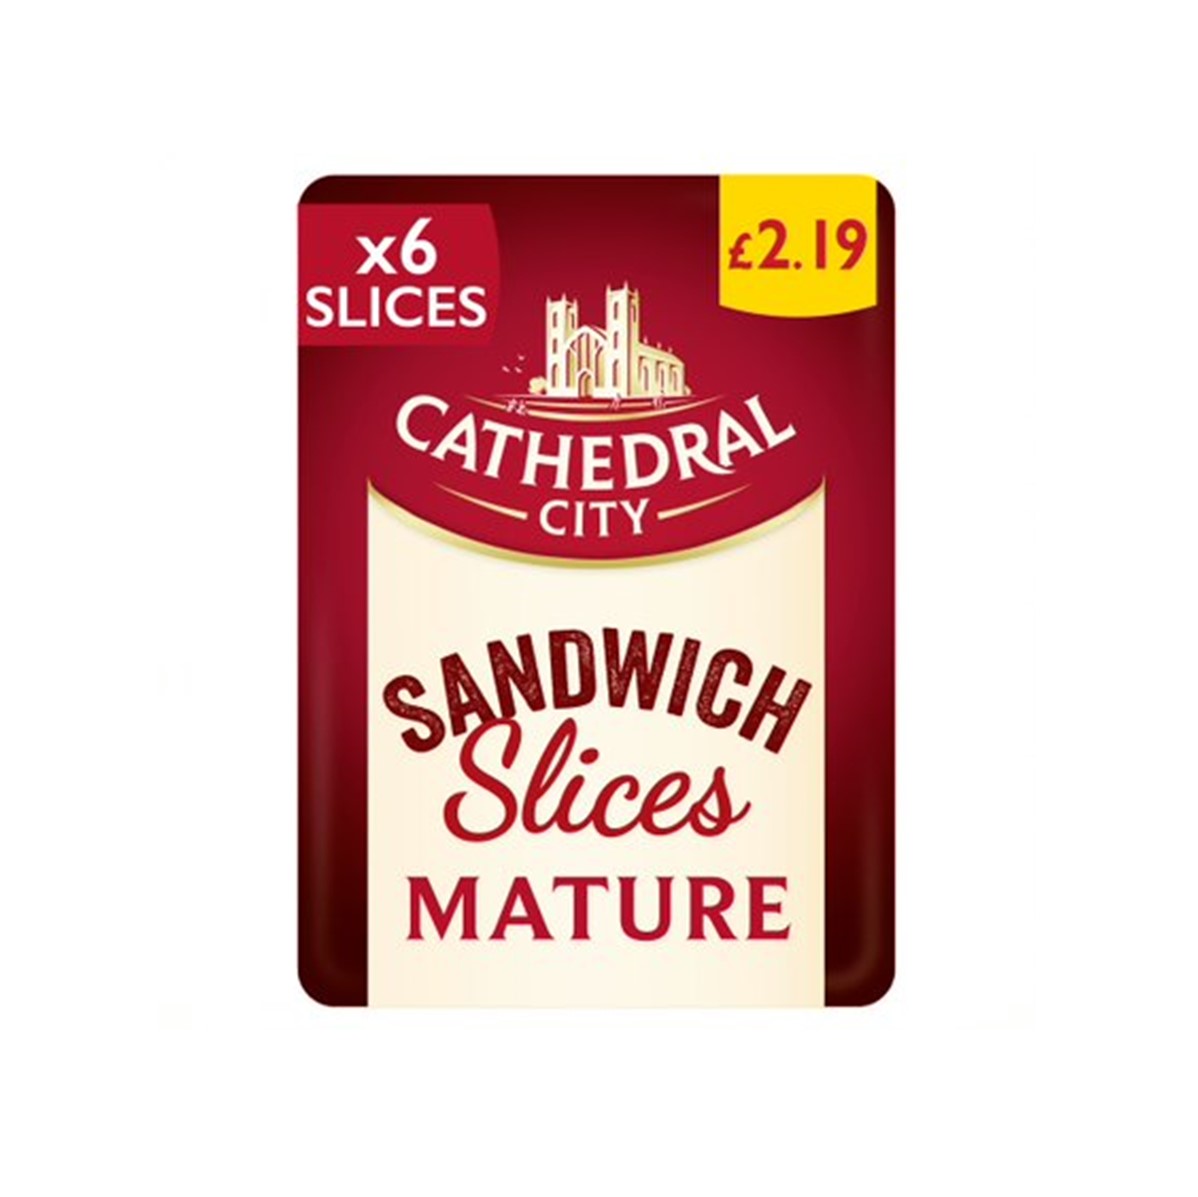 Cathedral City Mature Cheddar Slices - 150g [6 slices]